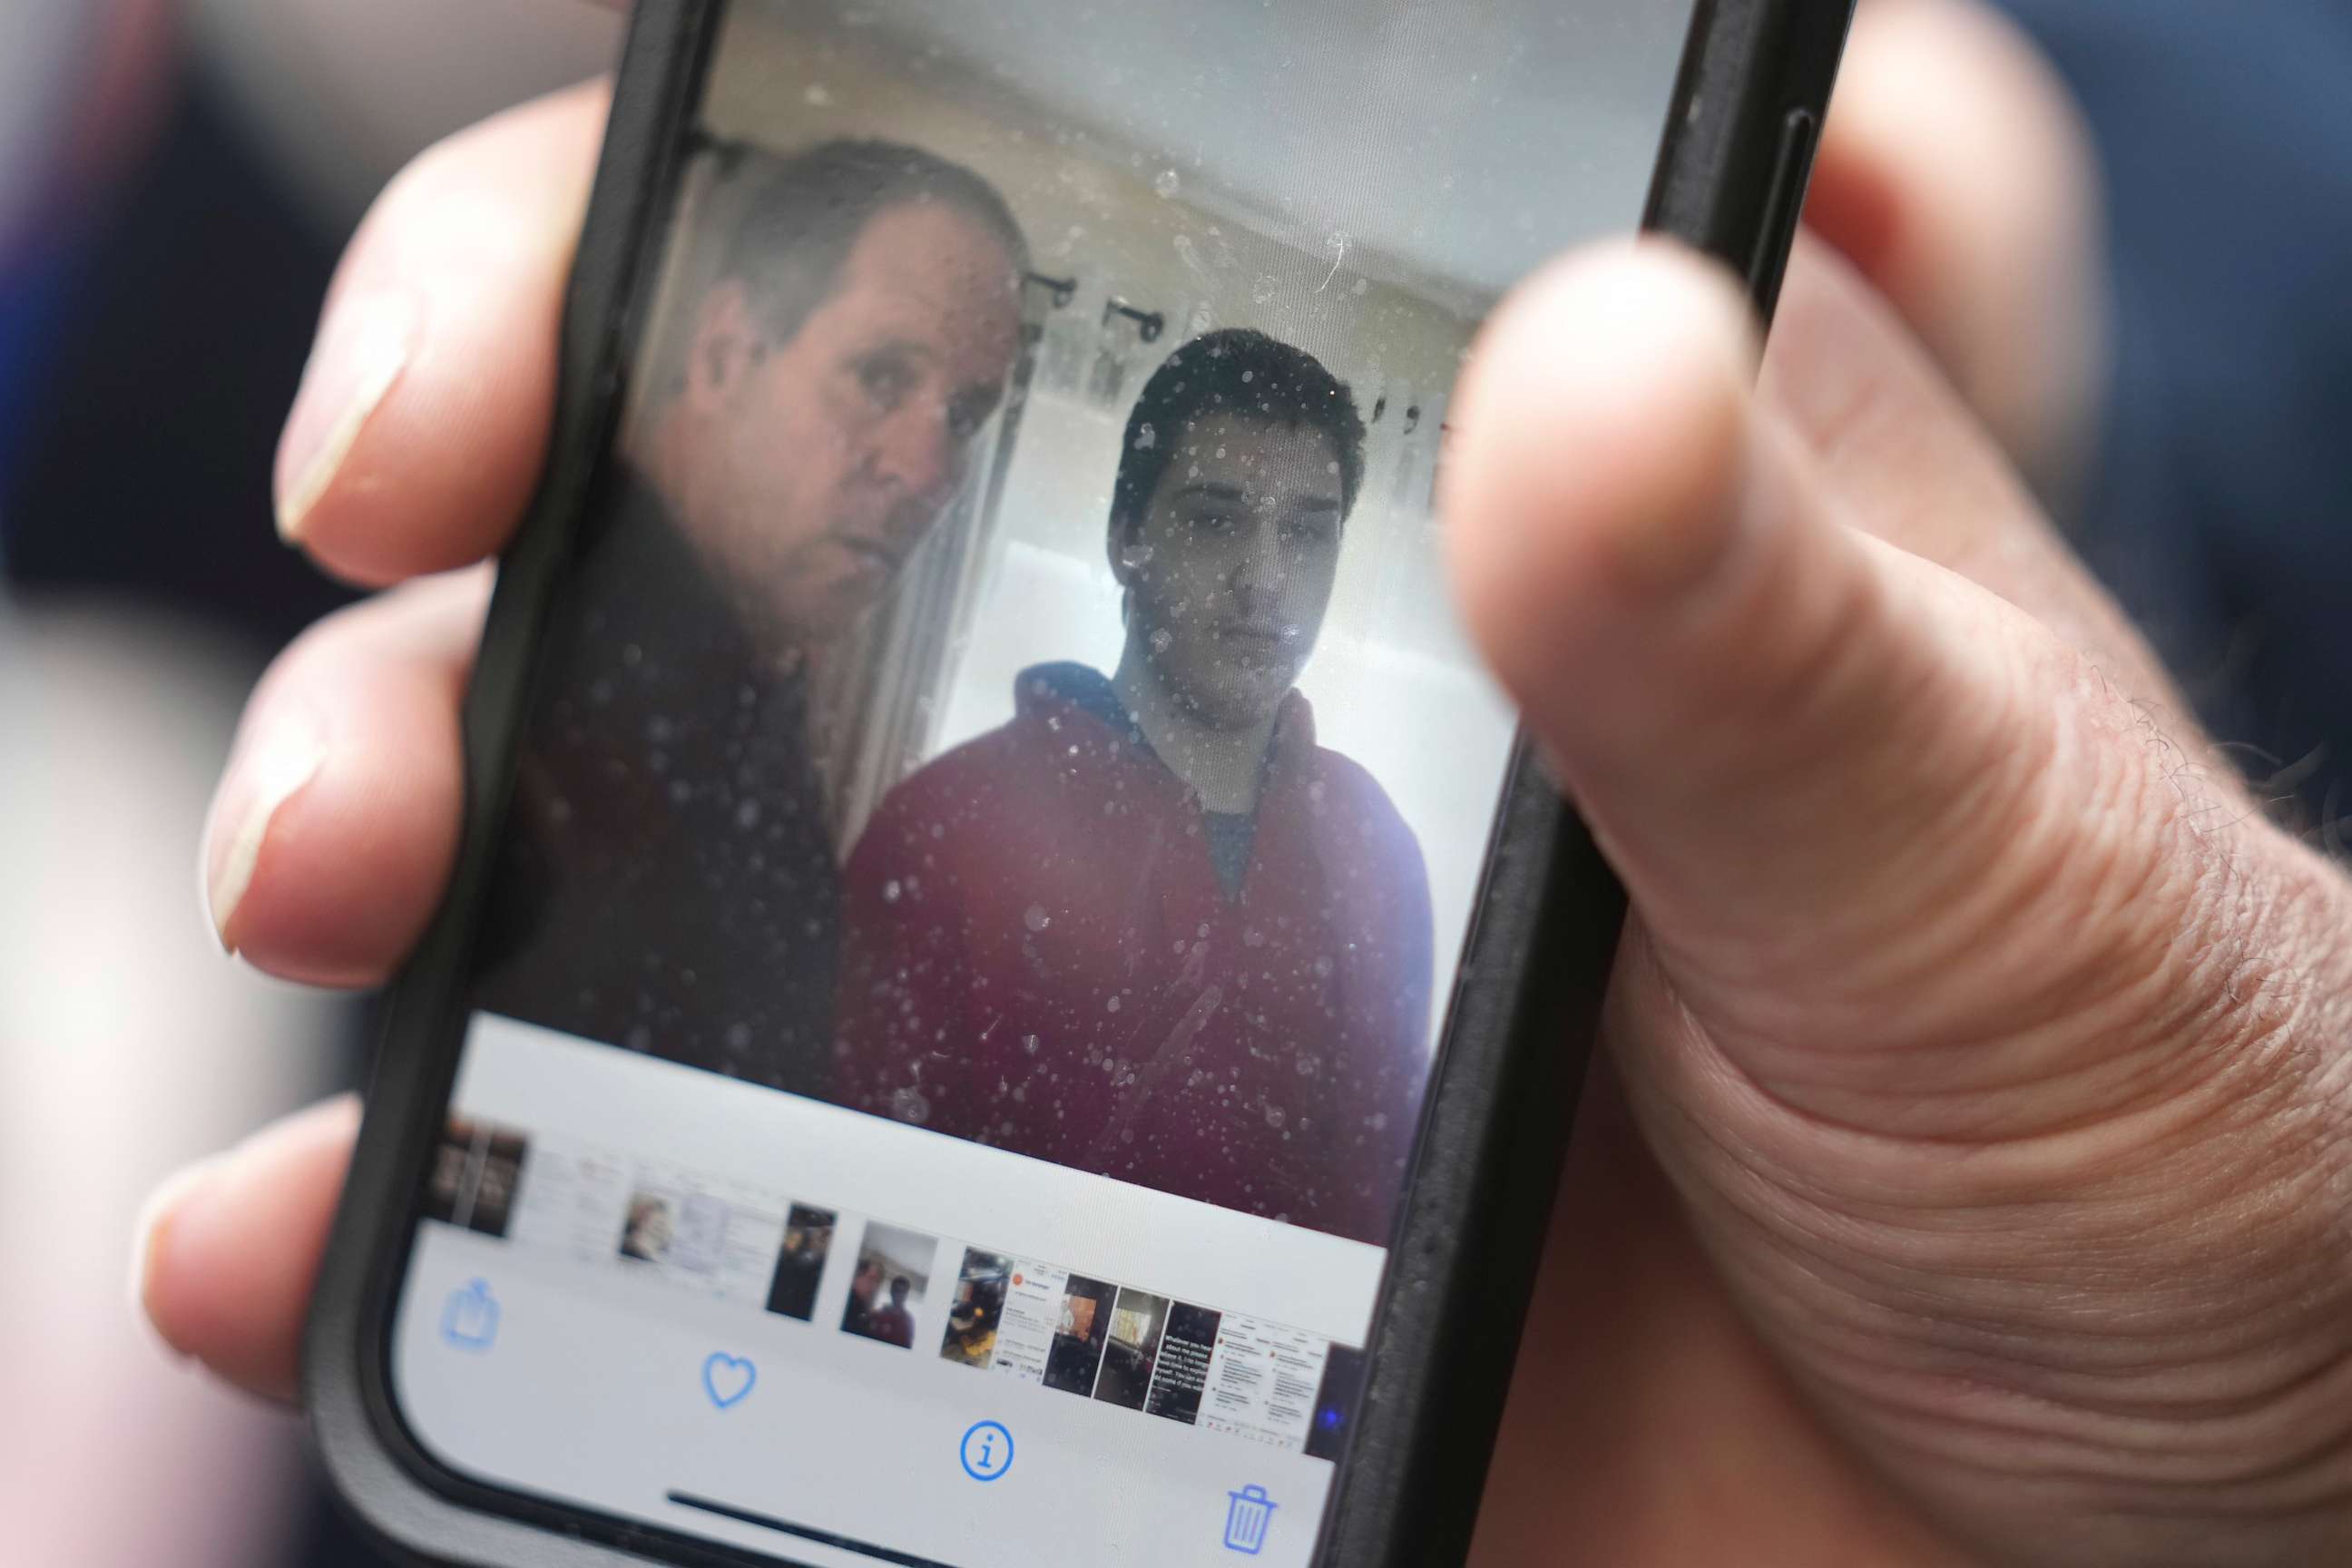 PHOTO: Paul Ventura, father of 18-year-old Mateo Ventura, both of Wakefield, Mass., displays a photograph on his cell phone that shows what he describes as a photo of himself and his son Mateo, right.